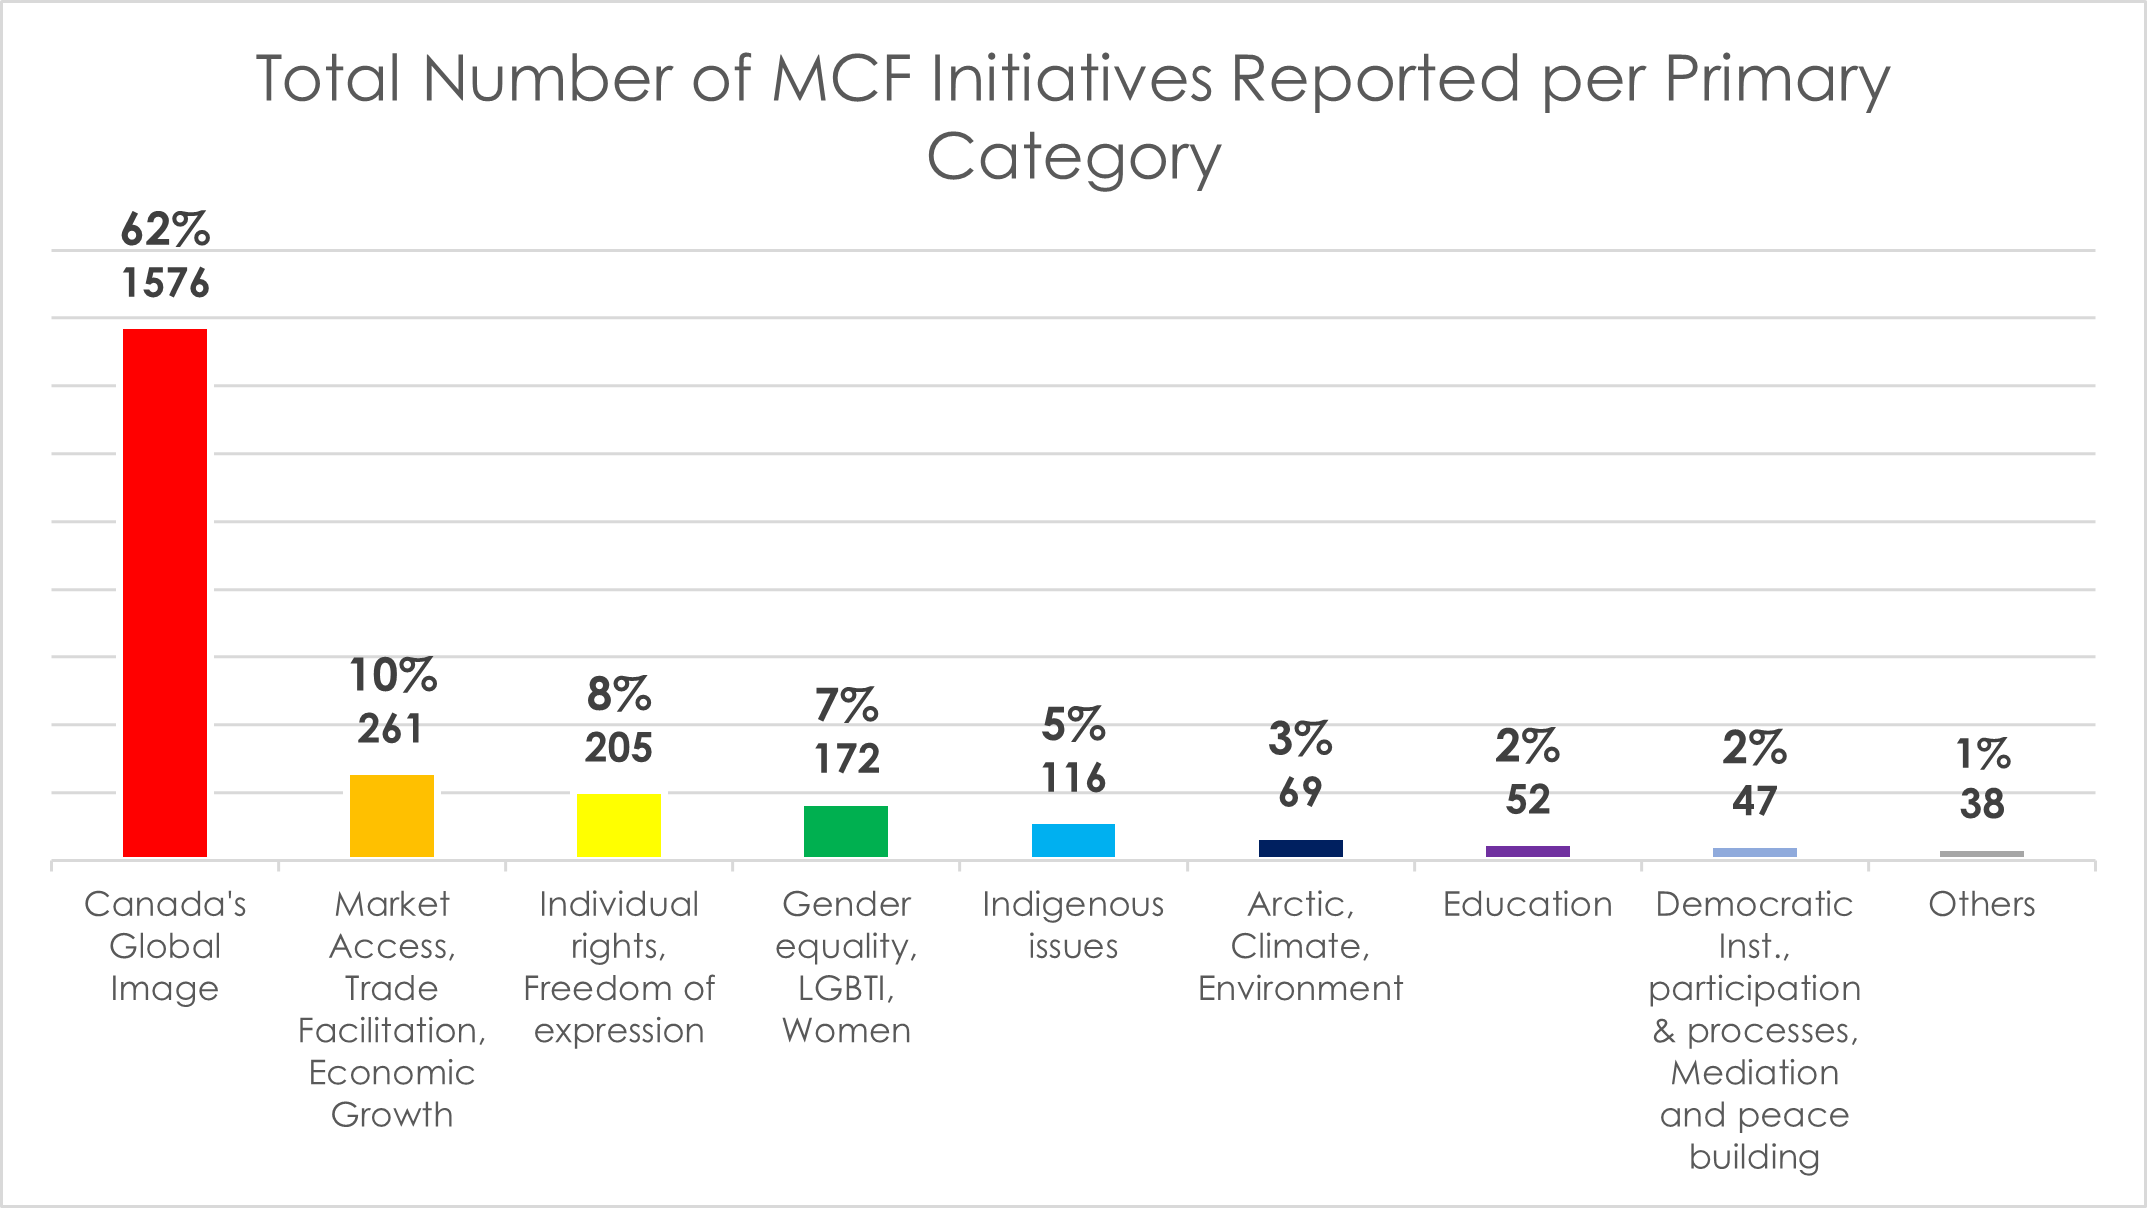 Total Number of MCF Initiatives Reported per Primary Category